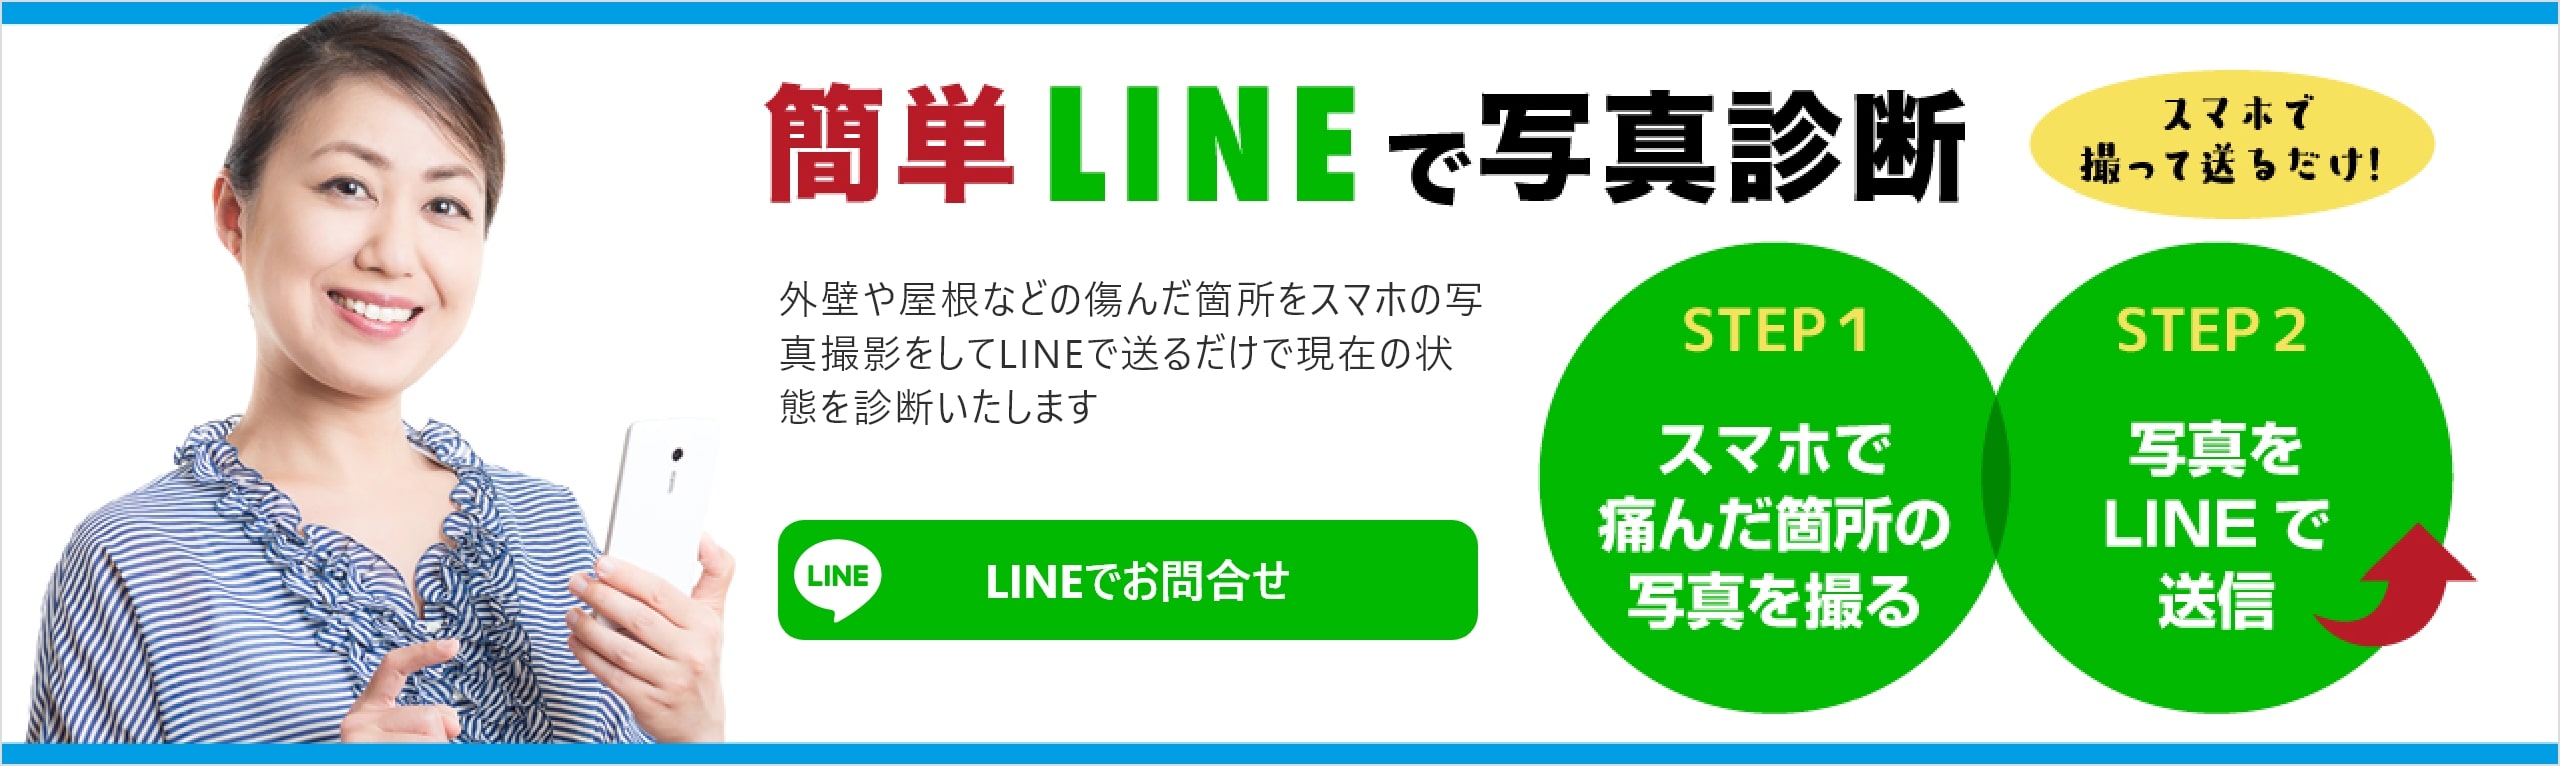 LINEで写真診断